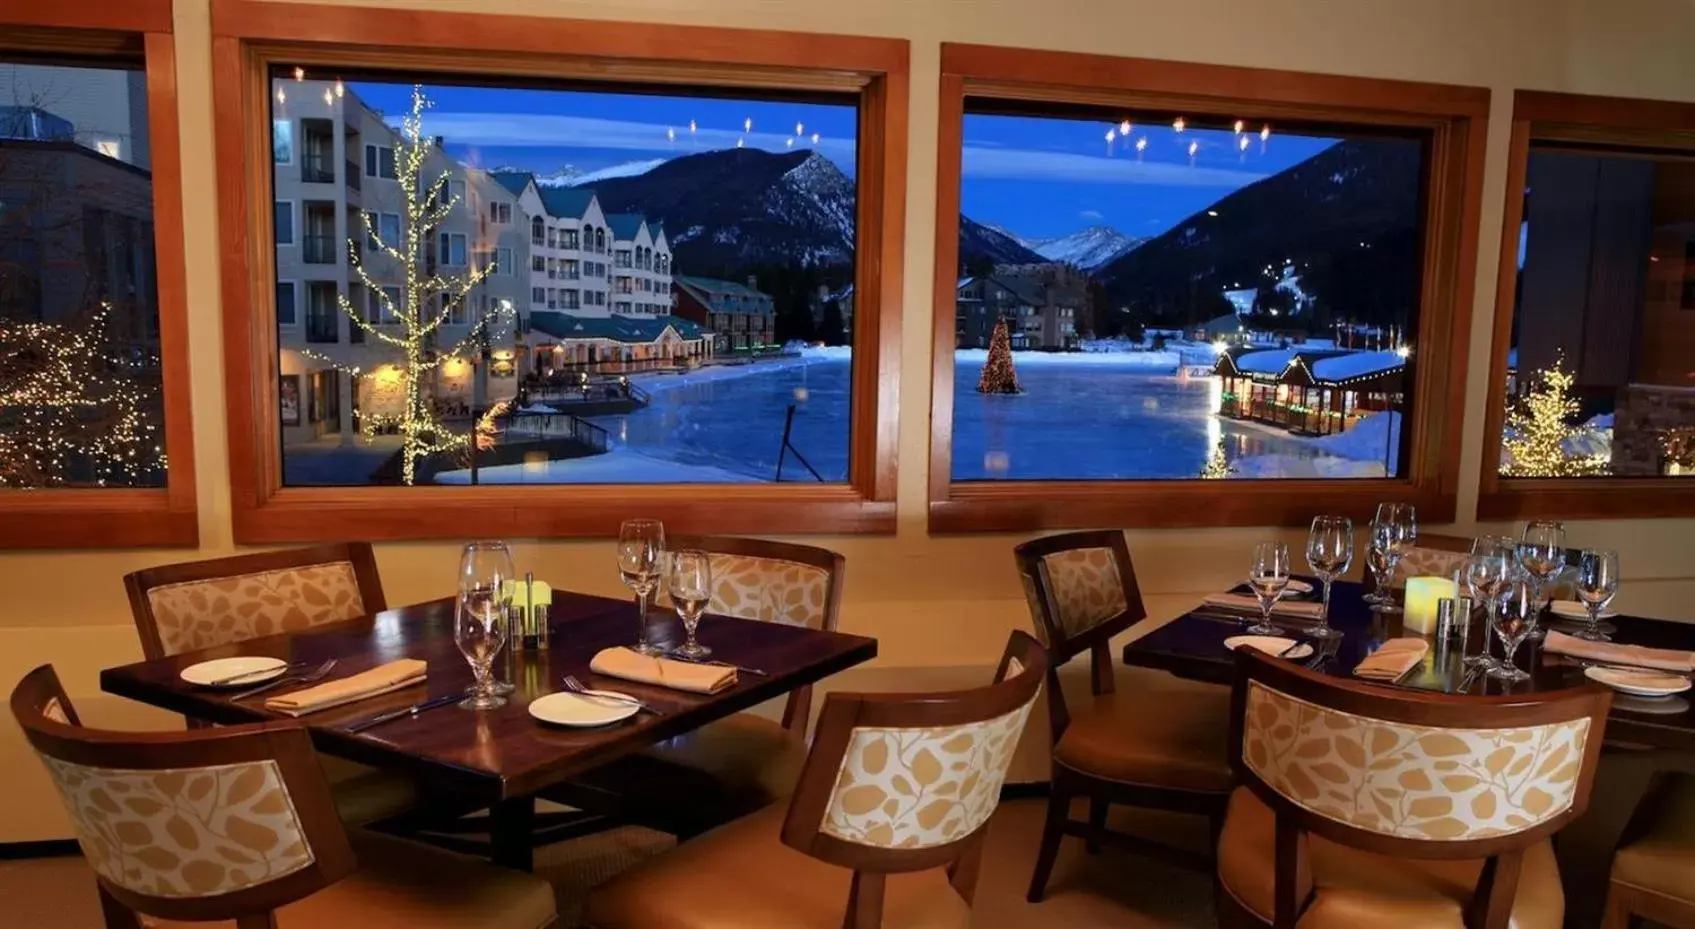 Restaurant/places to eat in The Keystone Lodge and Spa by Keystone Resort